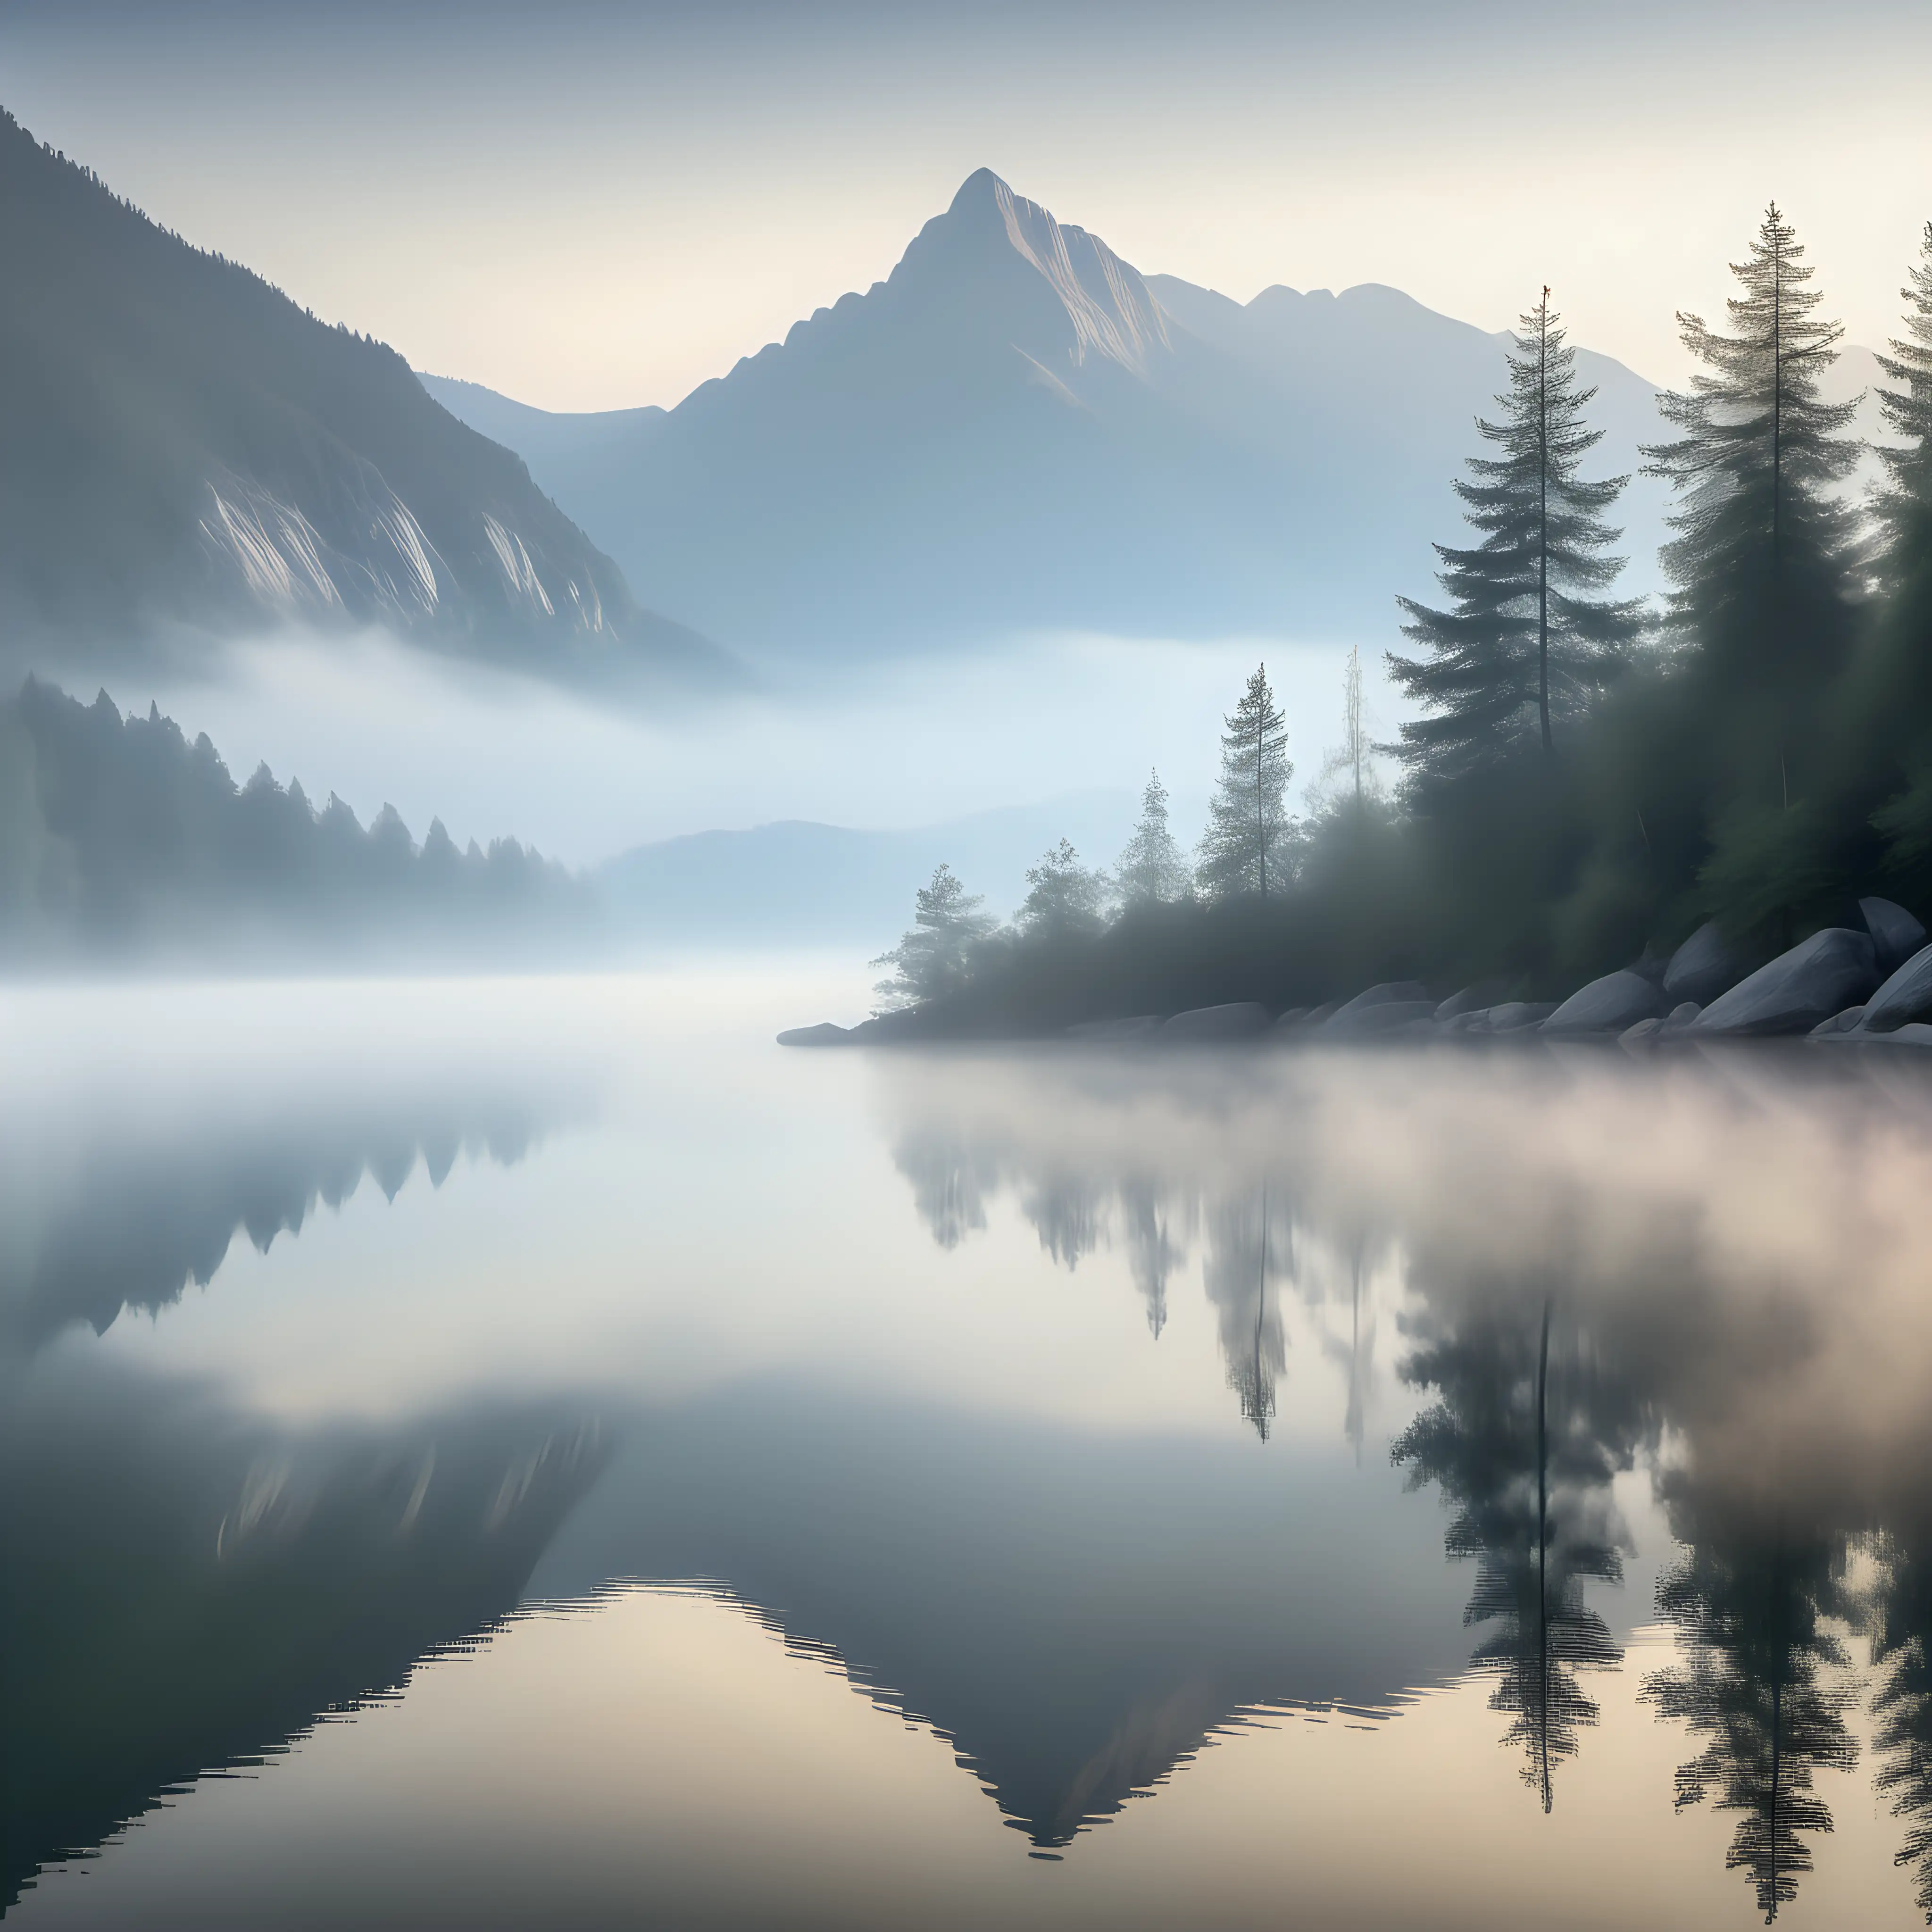 Ethereal Morning Mist Over Calm Mountain Lake